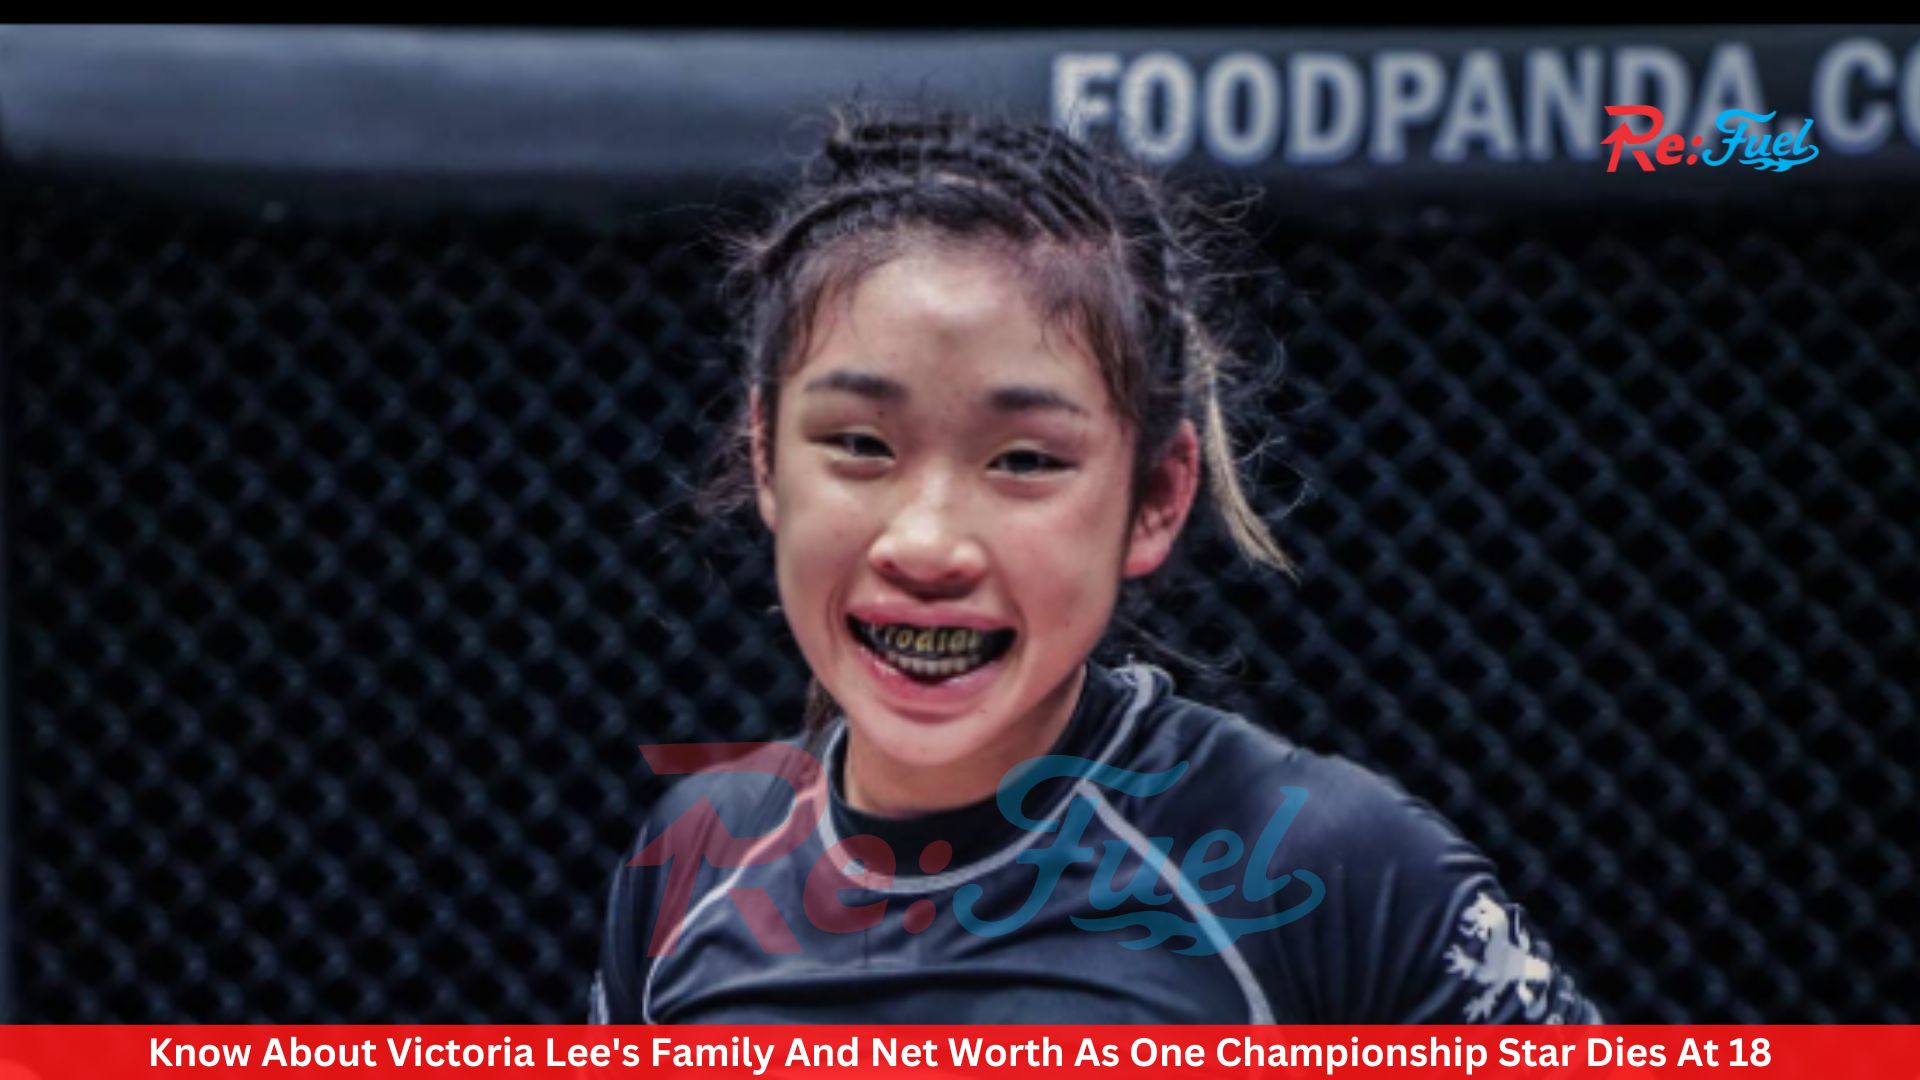 Know About Victoria Lee's Family And Net Worth As One Championship Star Dies At 18